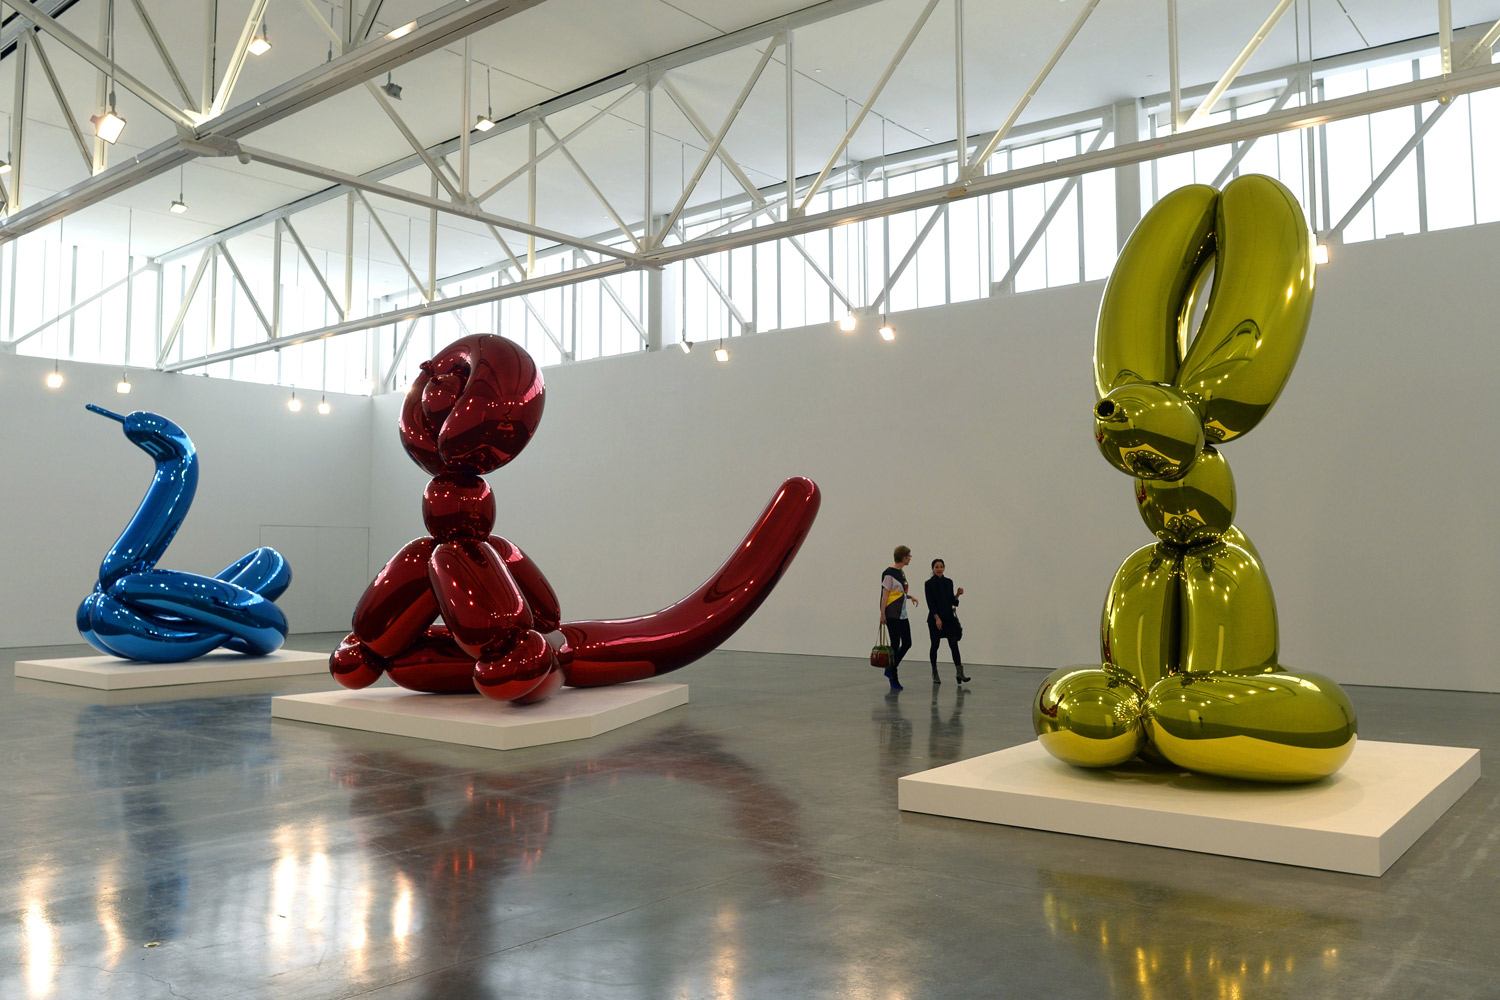 Deuk Gehakt Glans Jeff Koons' $58.4M Orange Balloon Dog and 10 Other Cool Balloon Pieces |  TIME.com